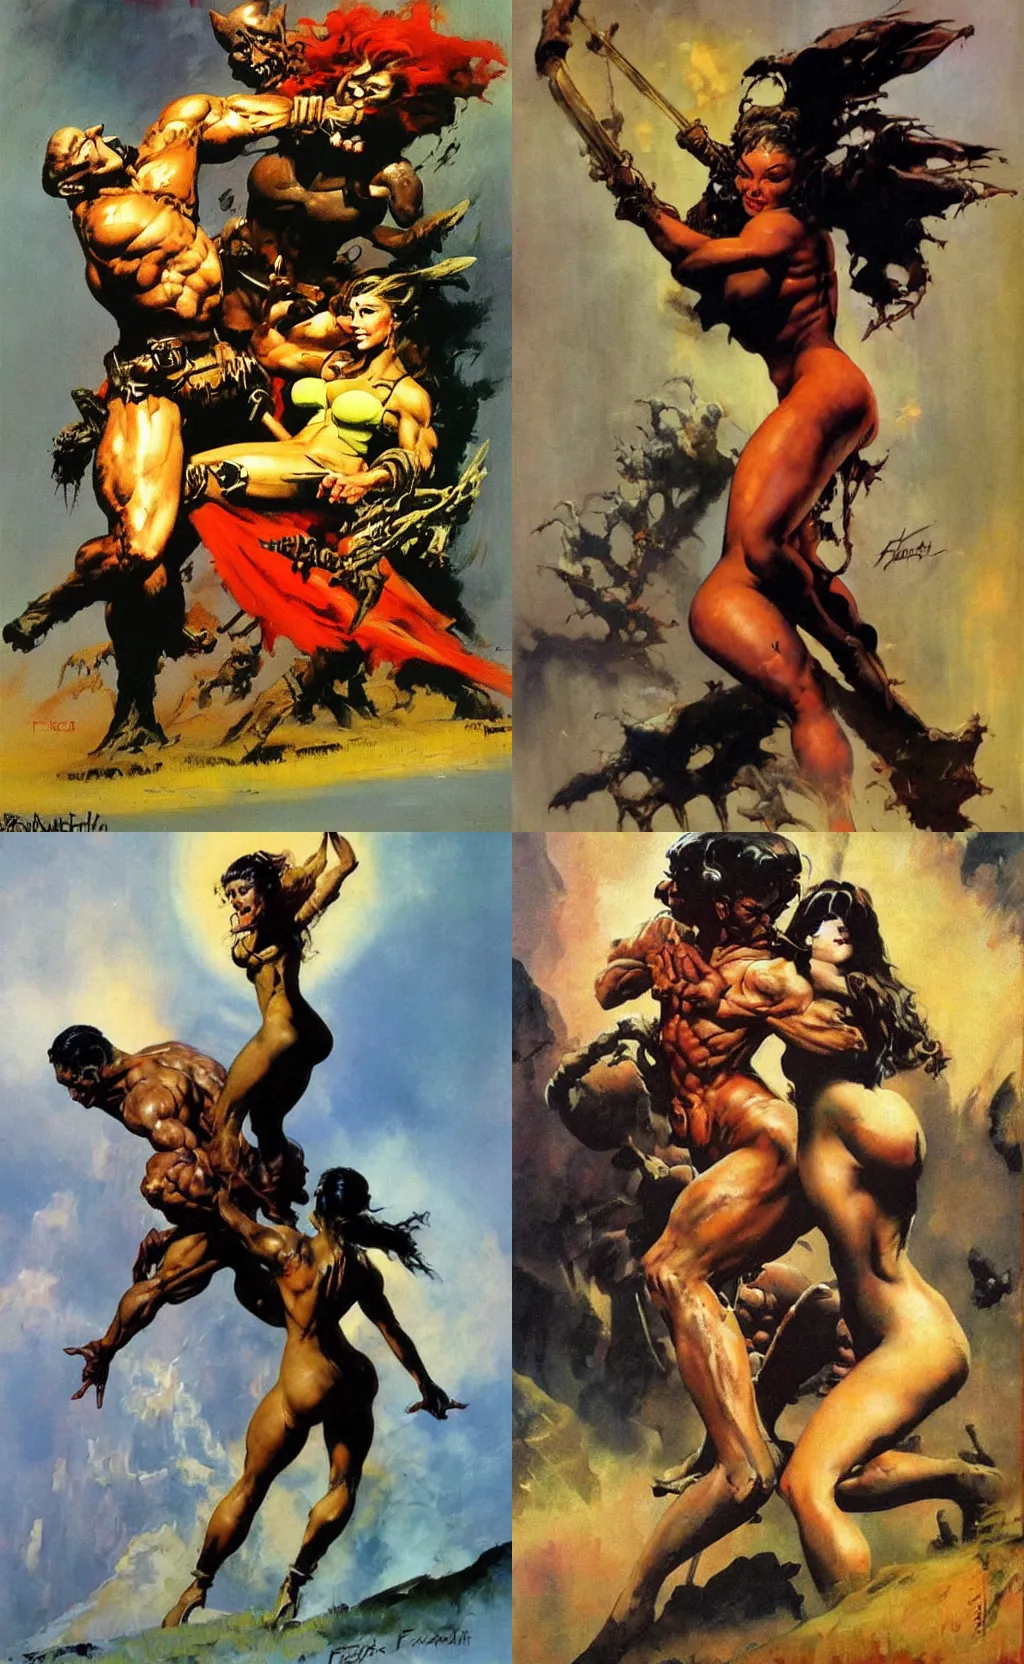 Prompt: A new painting by Frank Frazetta